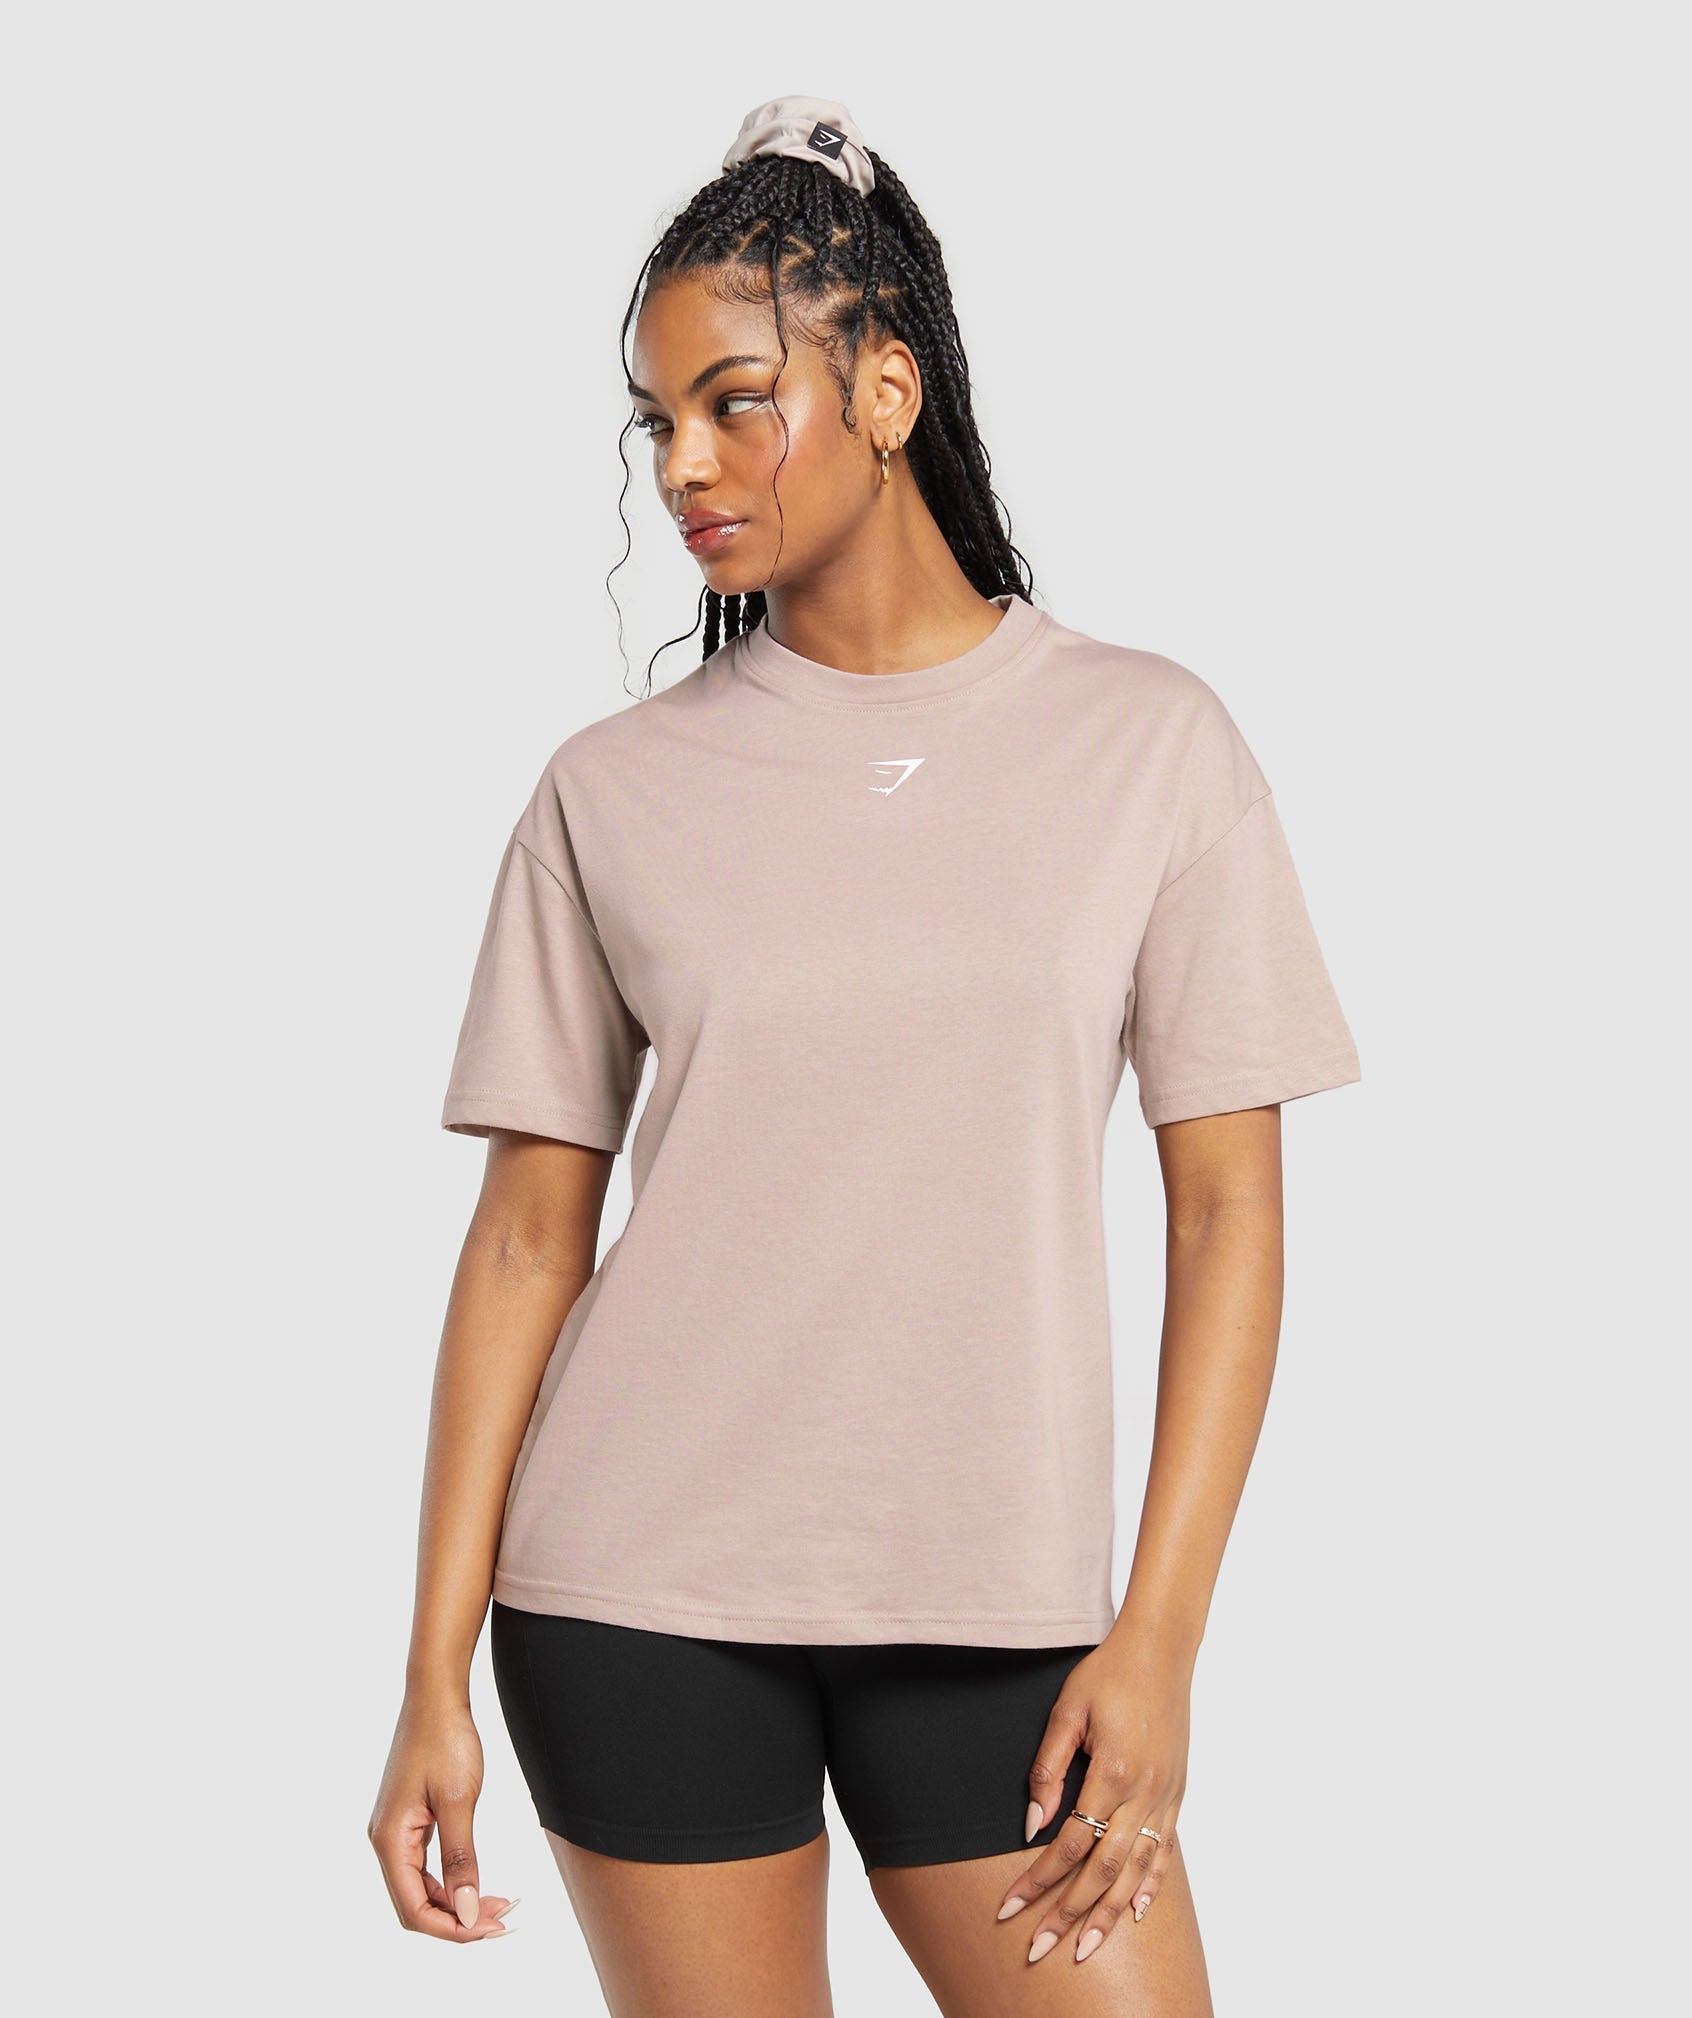 GS Power Oversized T-Shirt in Stone Pink - view 2